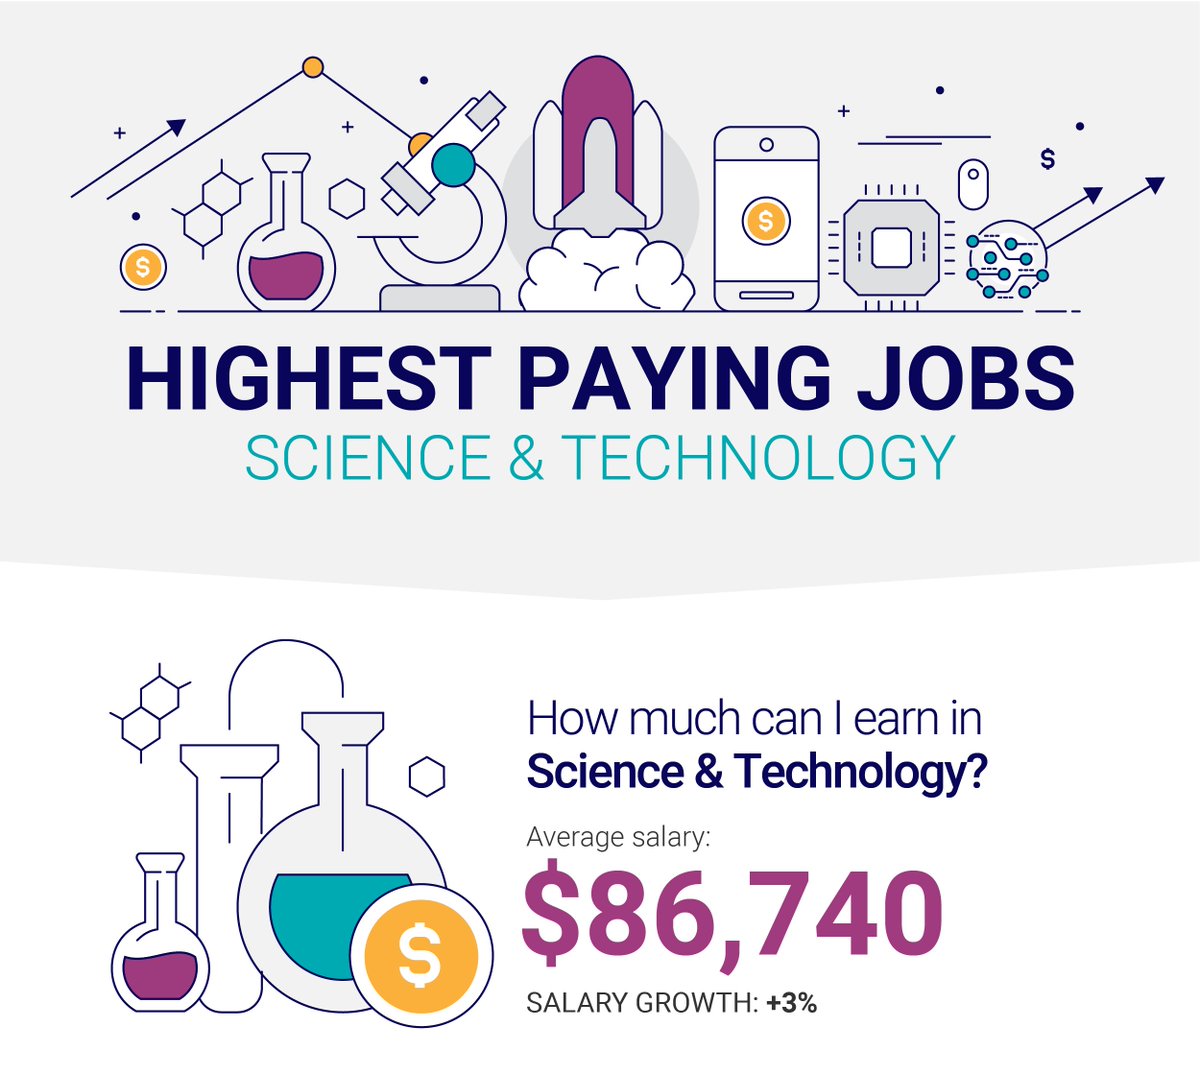 Maths and stats taking the number one spot for highest paying jobs in Science & Technology according to @seekjobs !!!  #achieveyourfullpotential
seek.com.au/career-advice/…